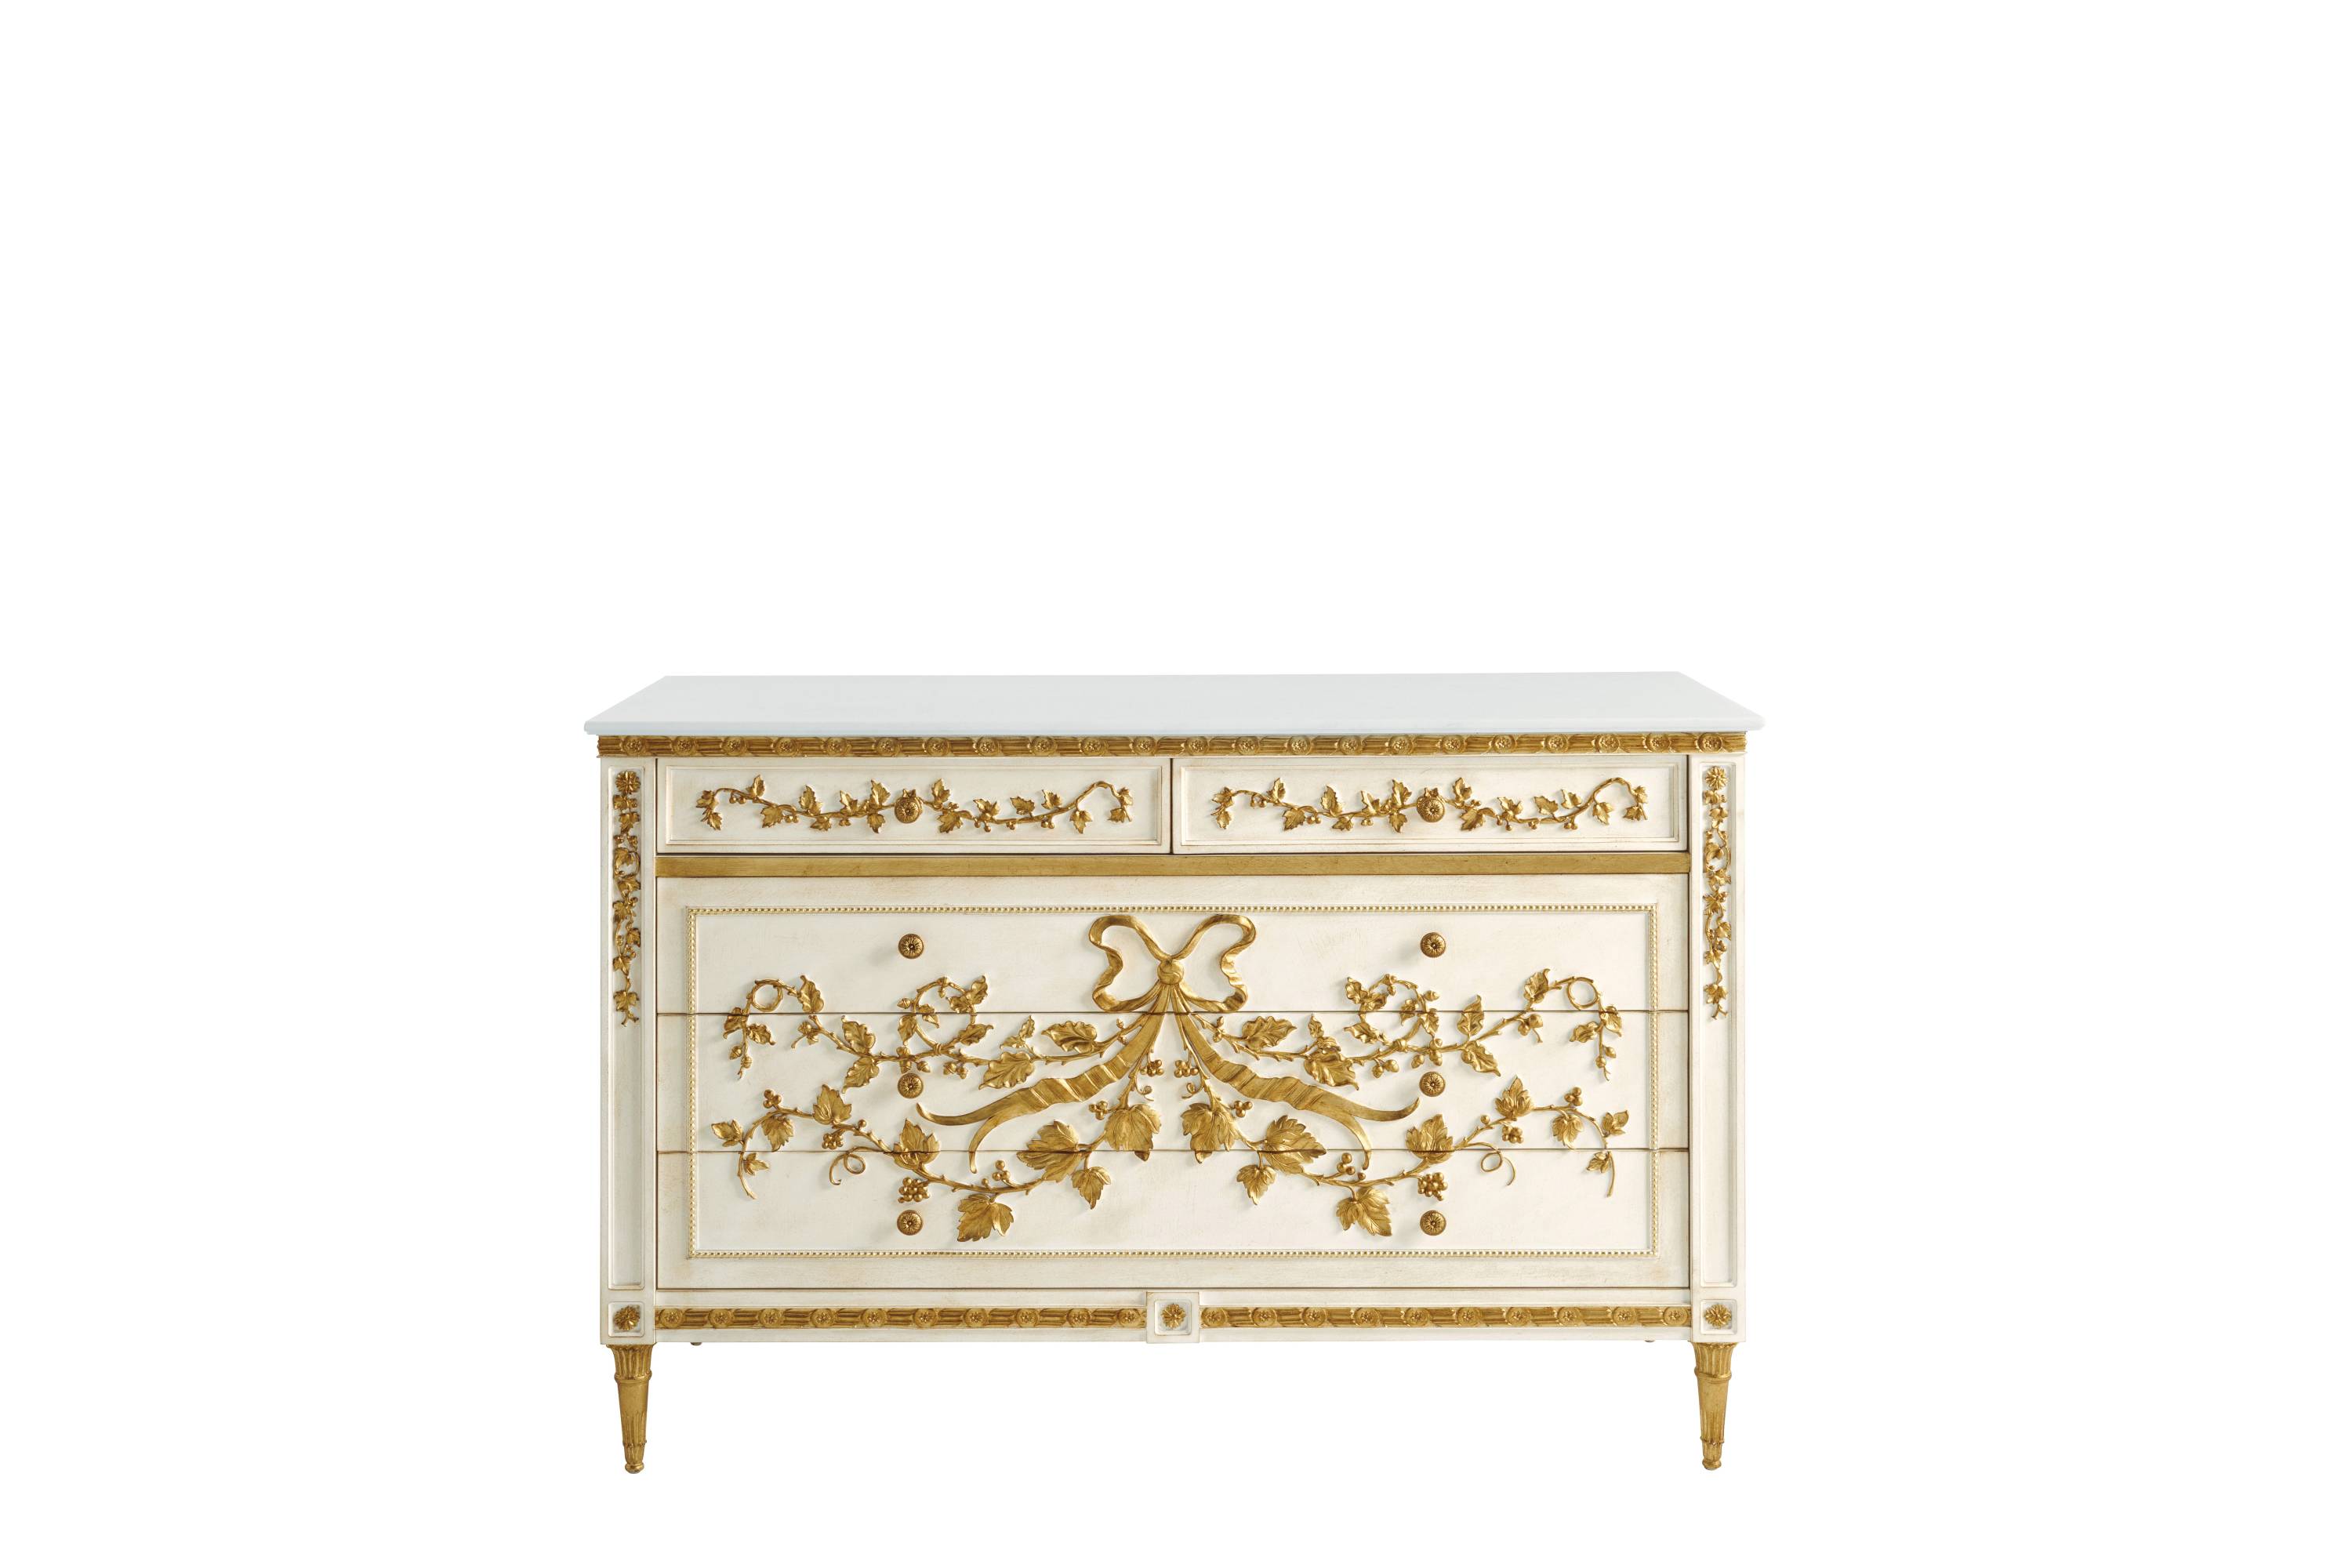 RUBANIER drawer unit - A luxury experience with the Héritage collection and its classic luxurious furniture